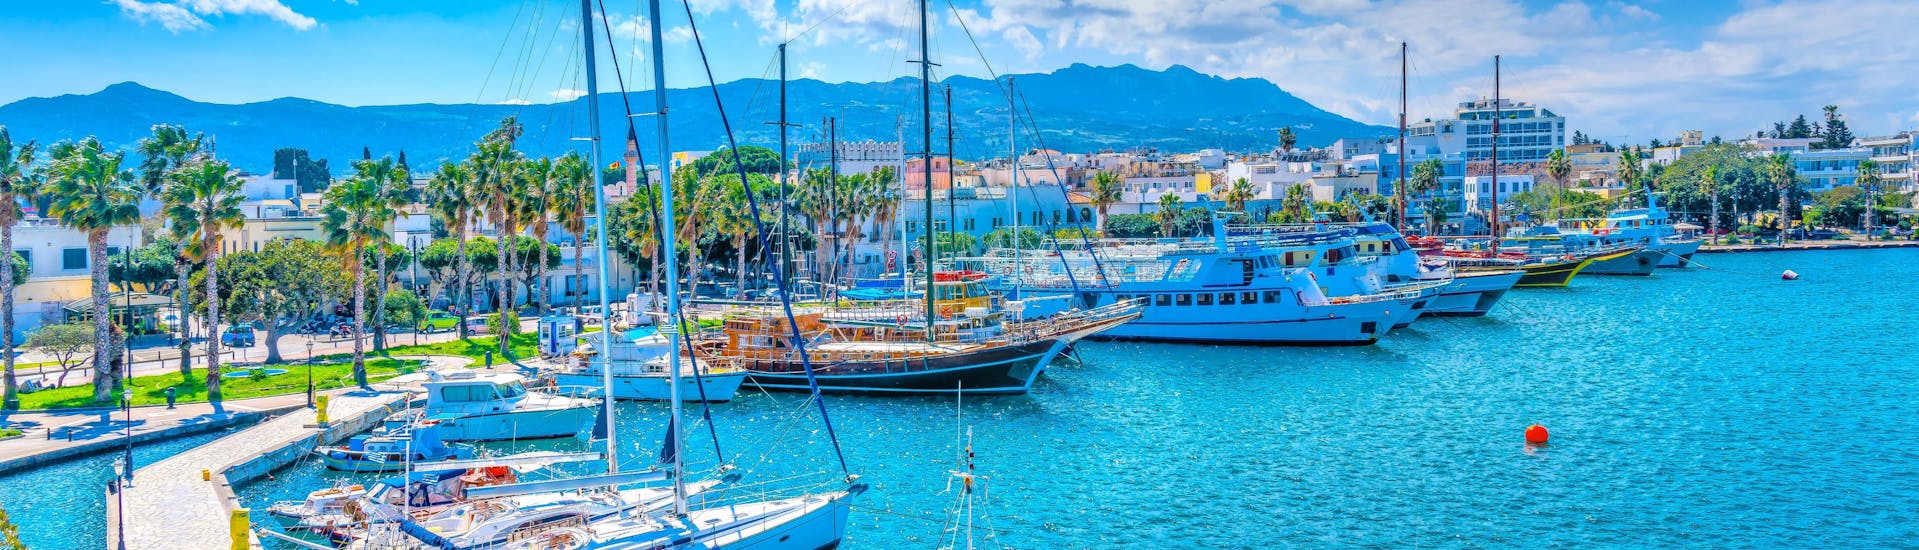 Picture of the port of Kos, Greece, a popular destination for boat trips.